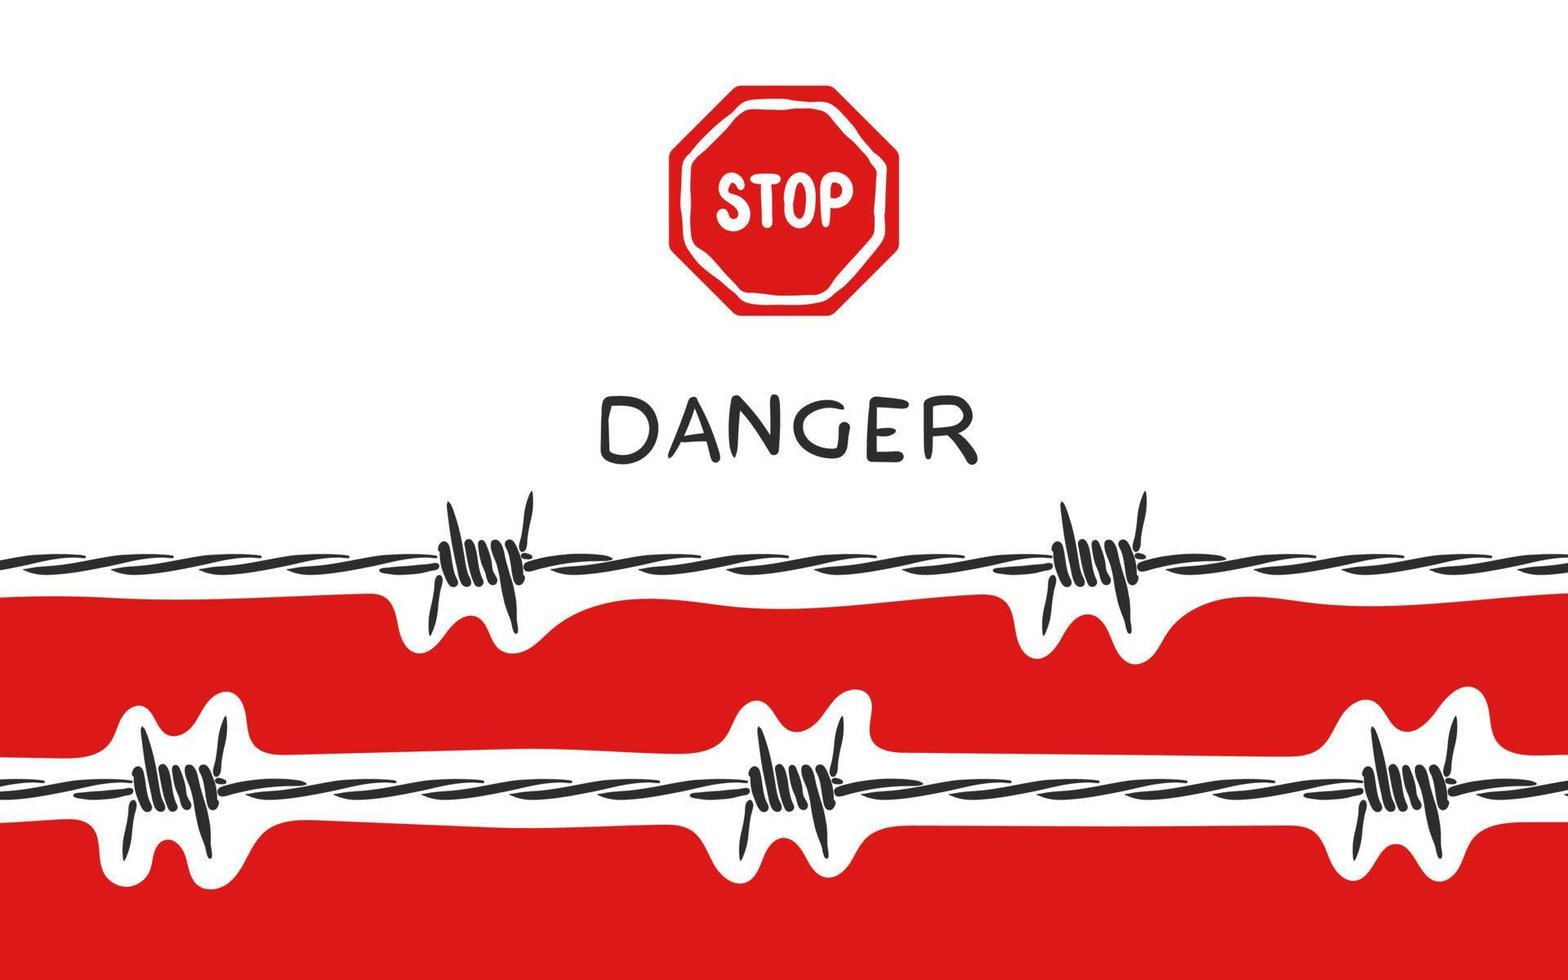 Barbed wire. Background with barbed wire and red stop sign. Vector scalable graphics